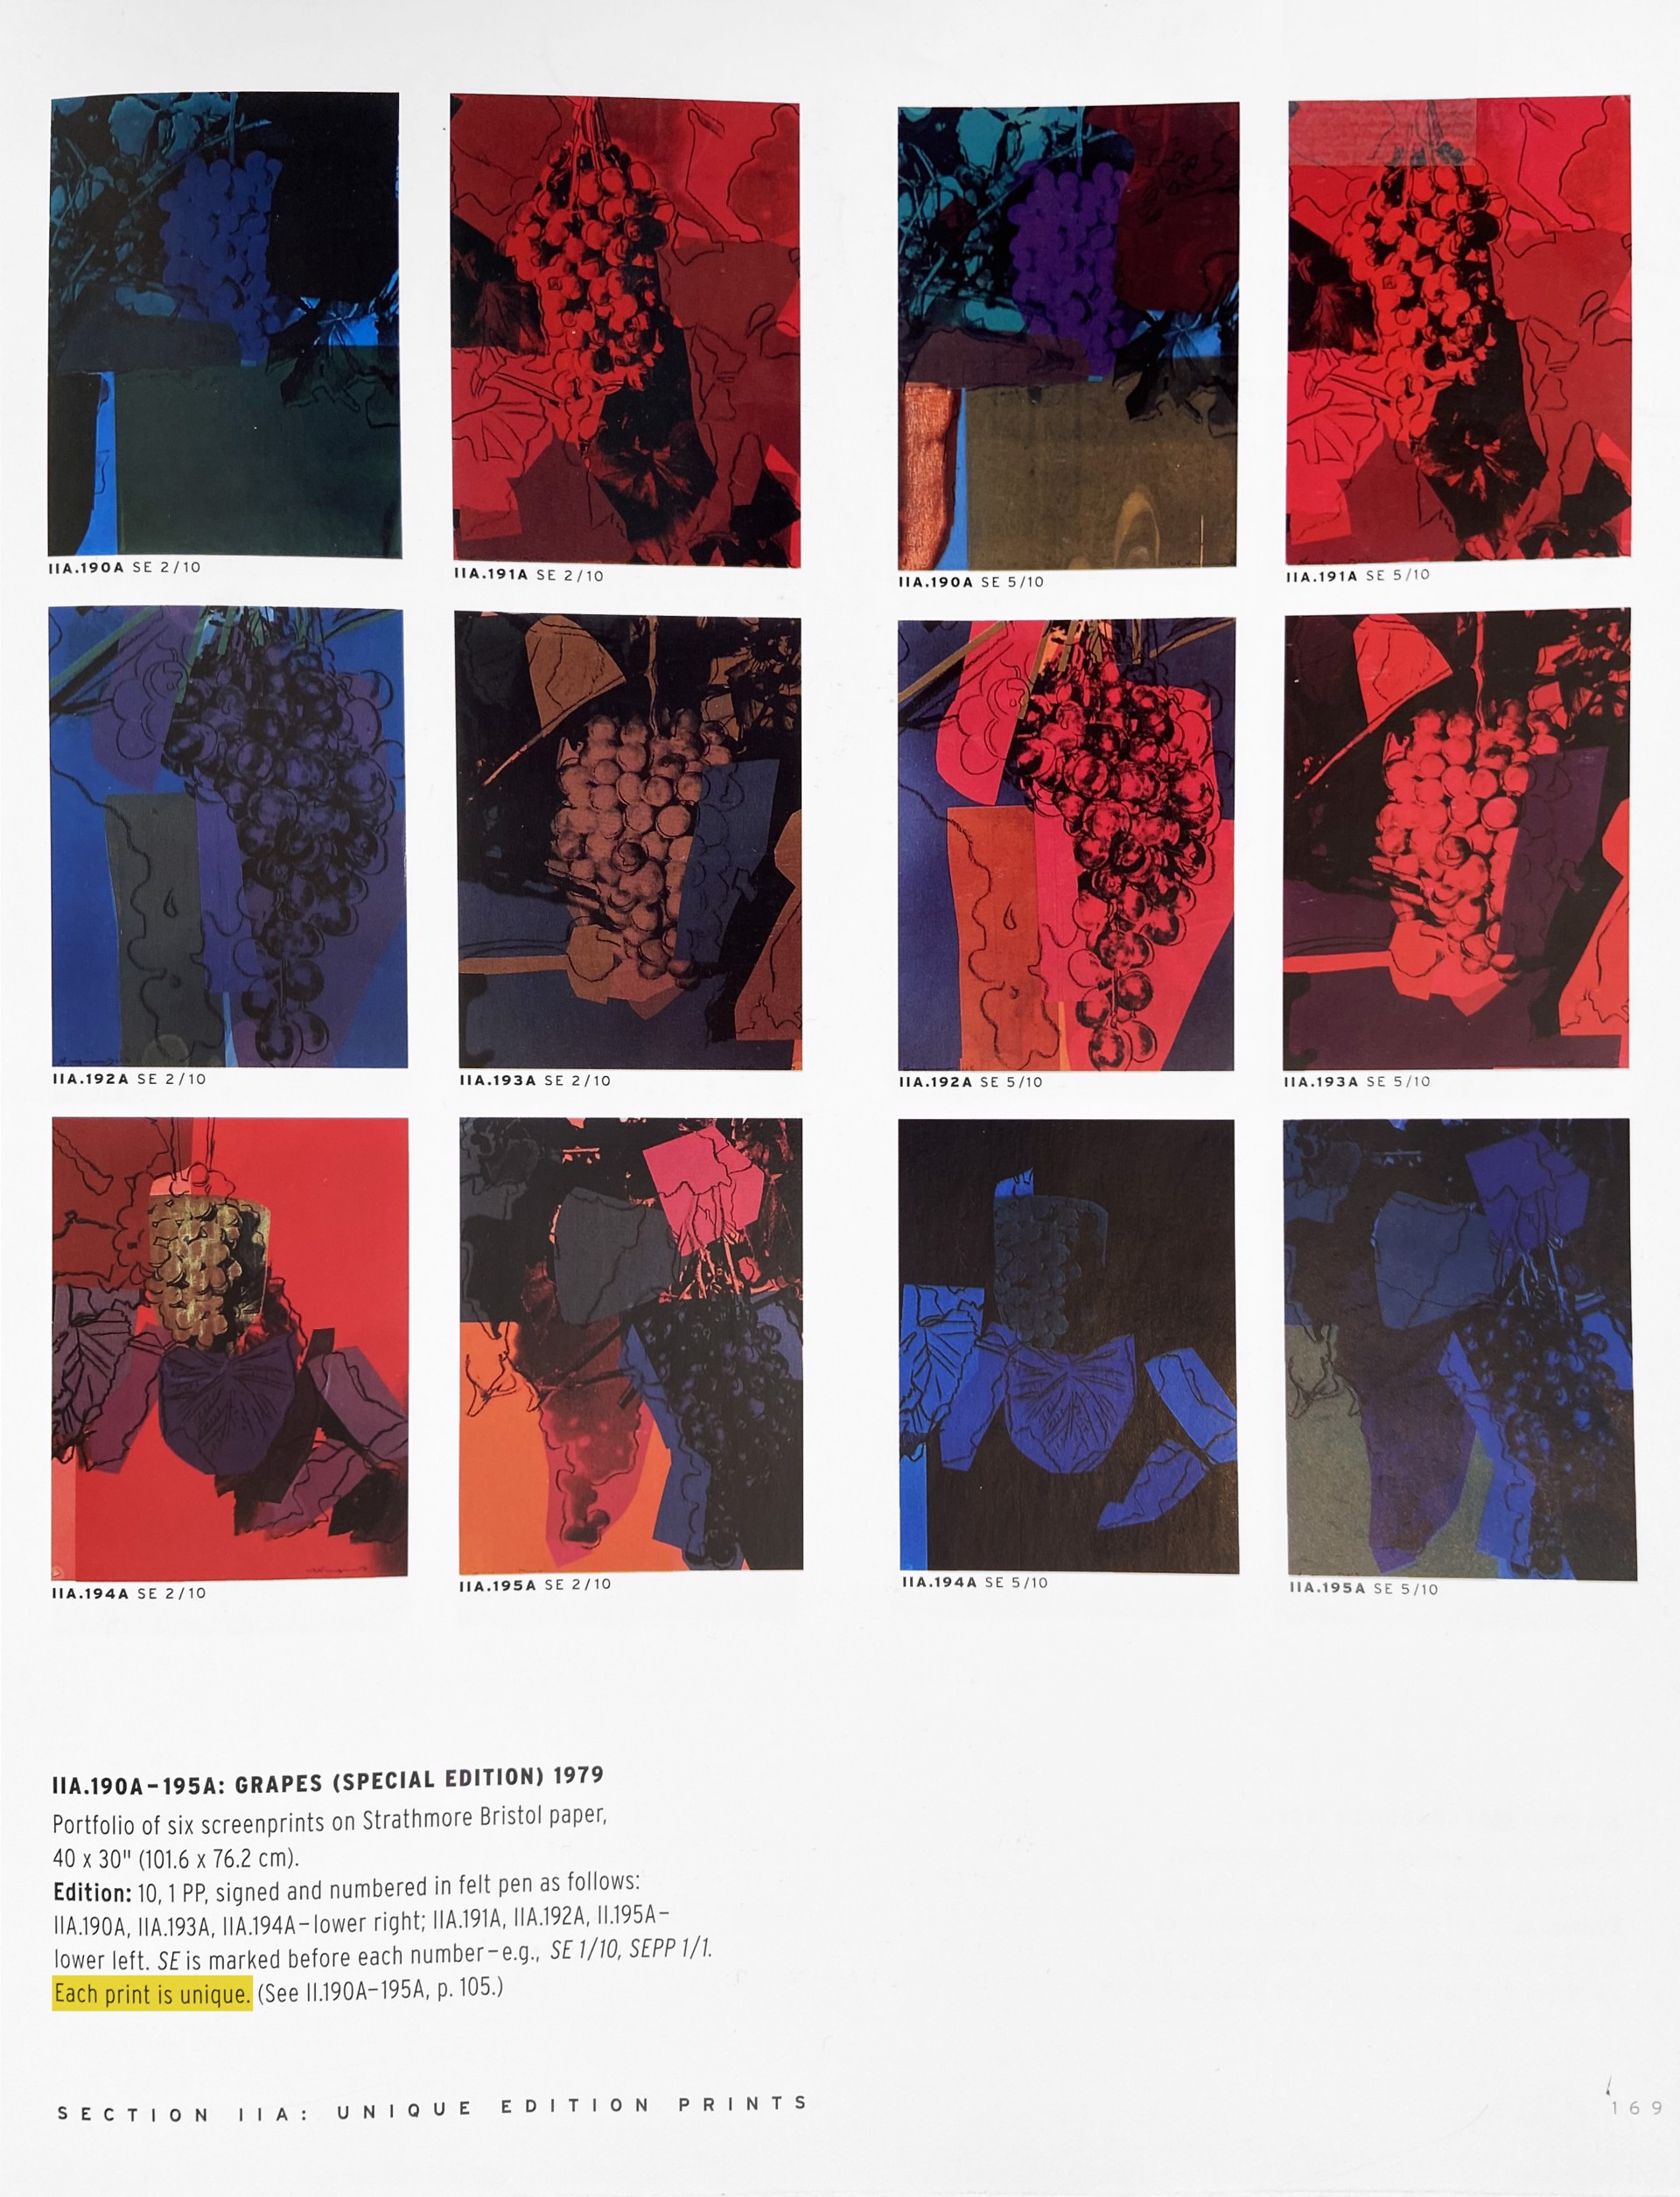 Grapes by Andy Warhol